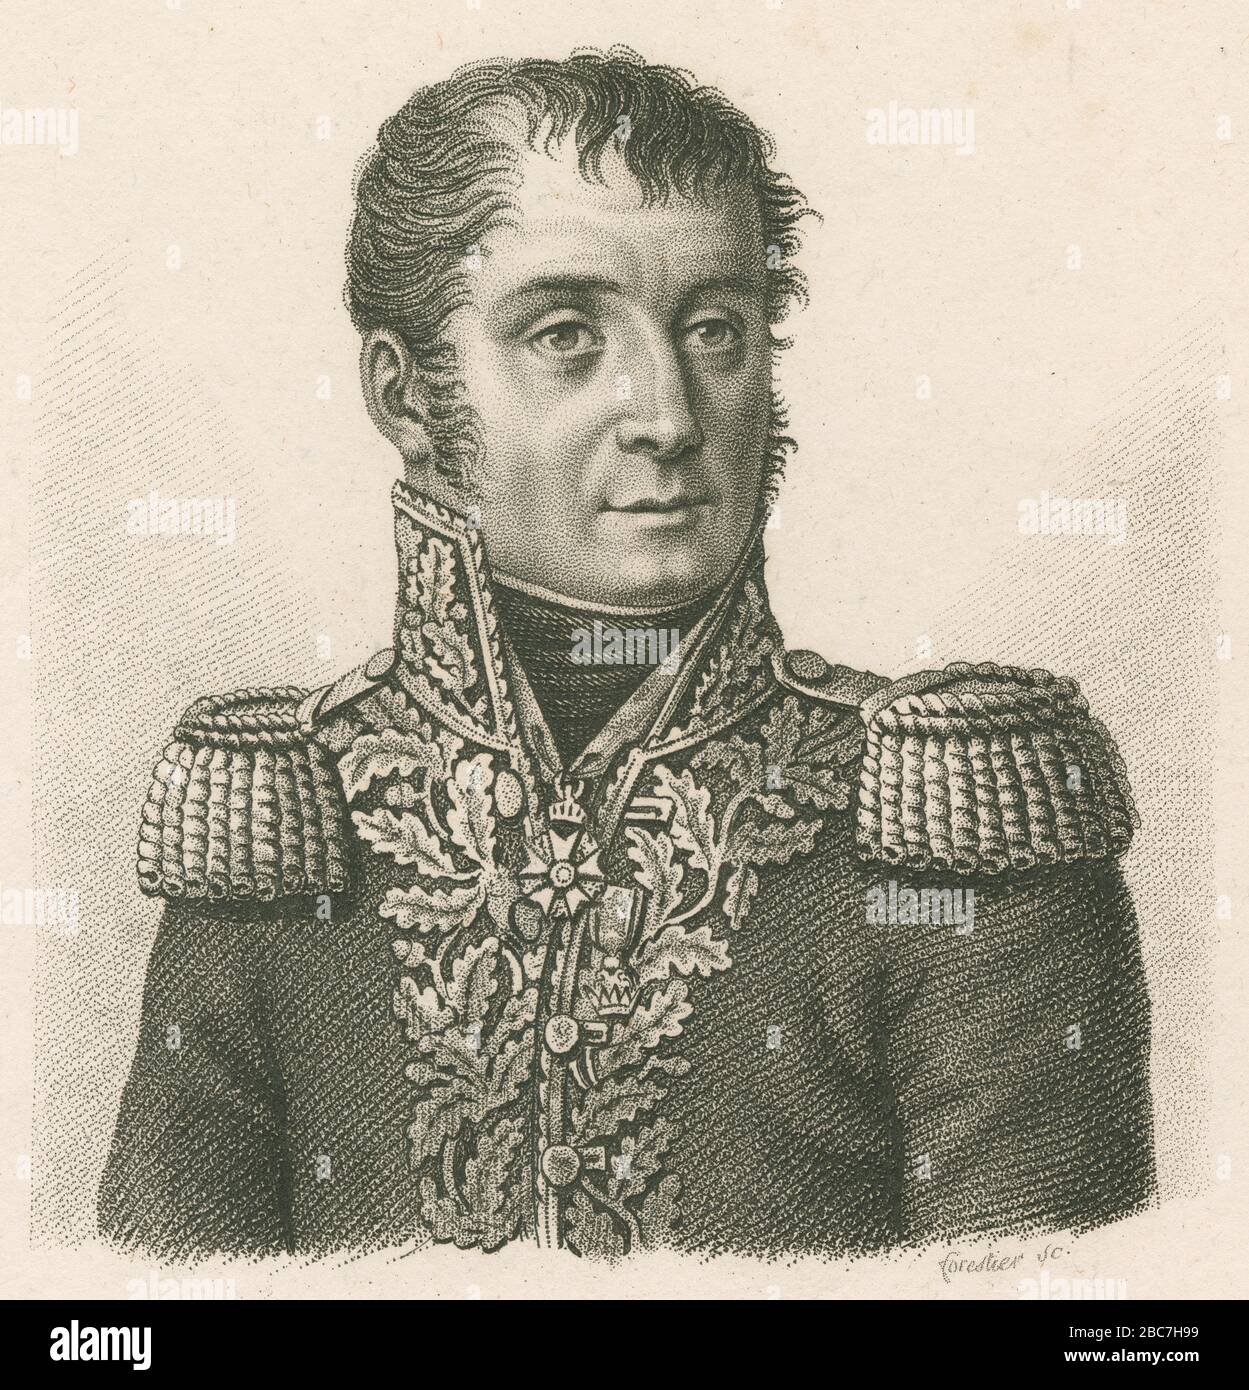 Antique engraving, Régis Barthélemy Mouton-Duvernet. Régis Barthélemy, Baron Mouton-Duvernet (1771-1816) was a French general who after the Hundred Days was executed by the Bourbon restoration. SOURCE: ORIGINAL ENGRAVING Stock Photo